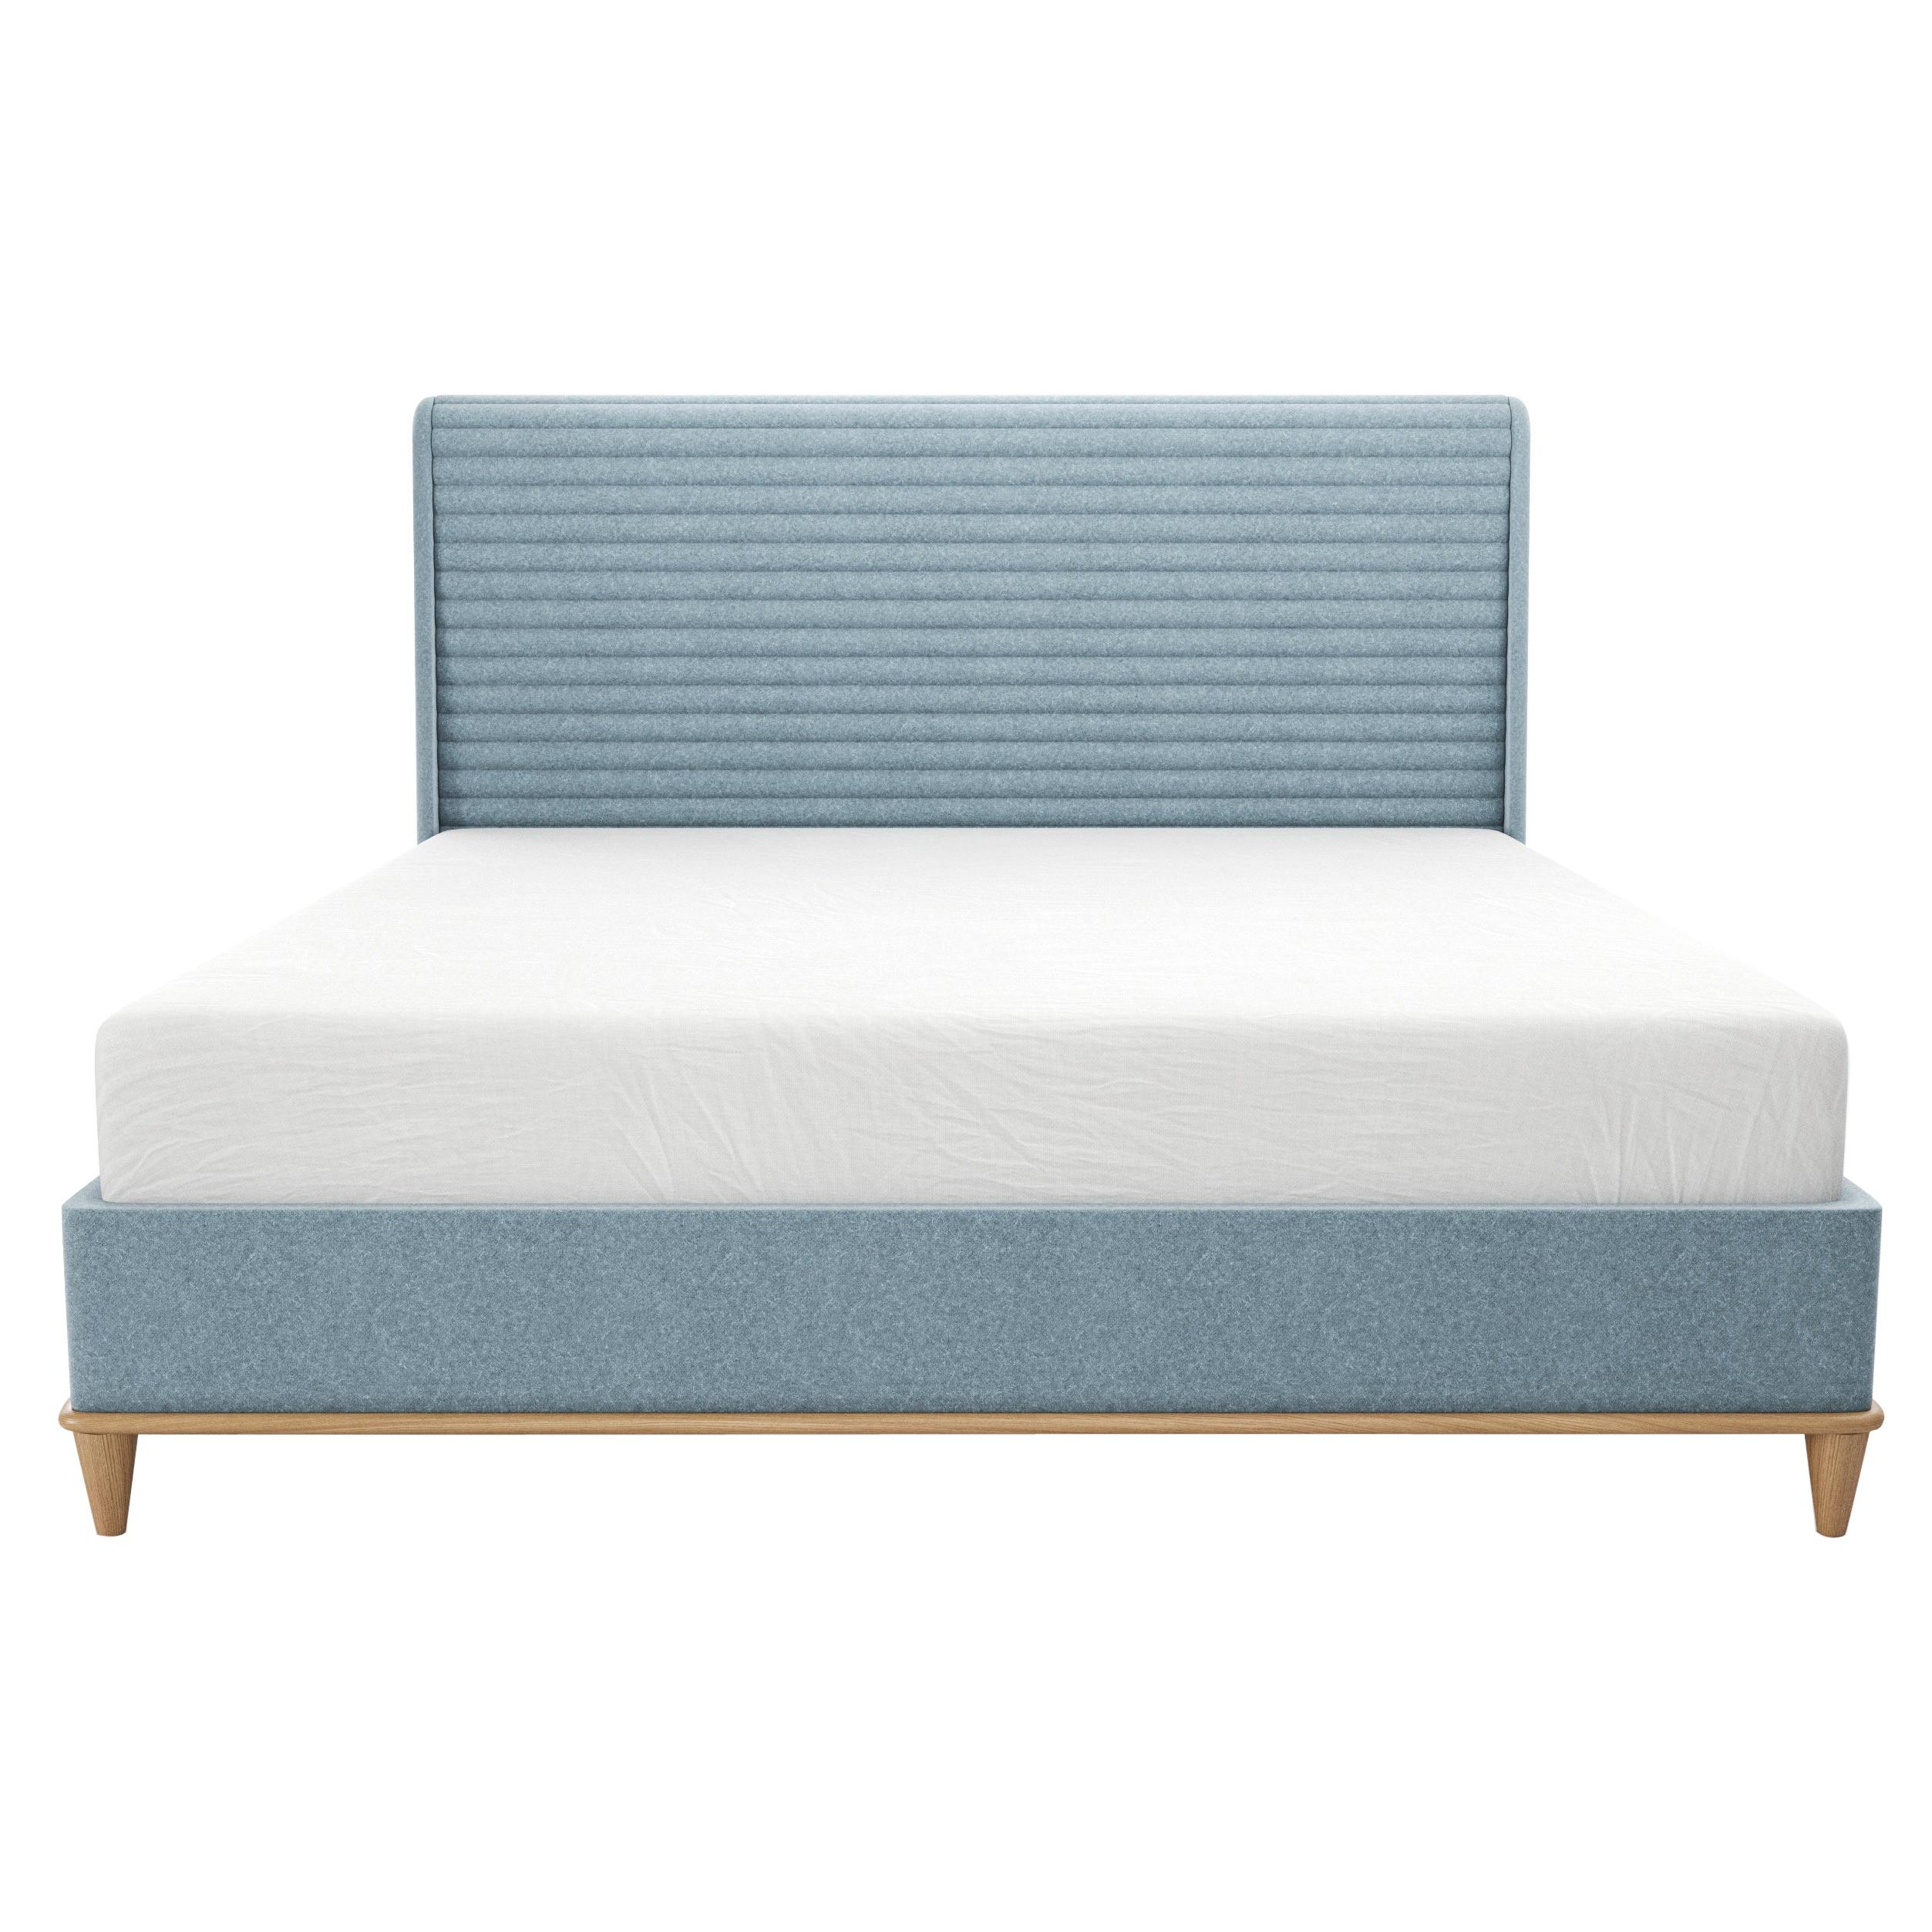 Upholstered Bed with Channeled Headboard and Covered Rails on Wood Base and Legs For Sale